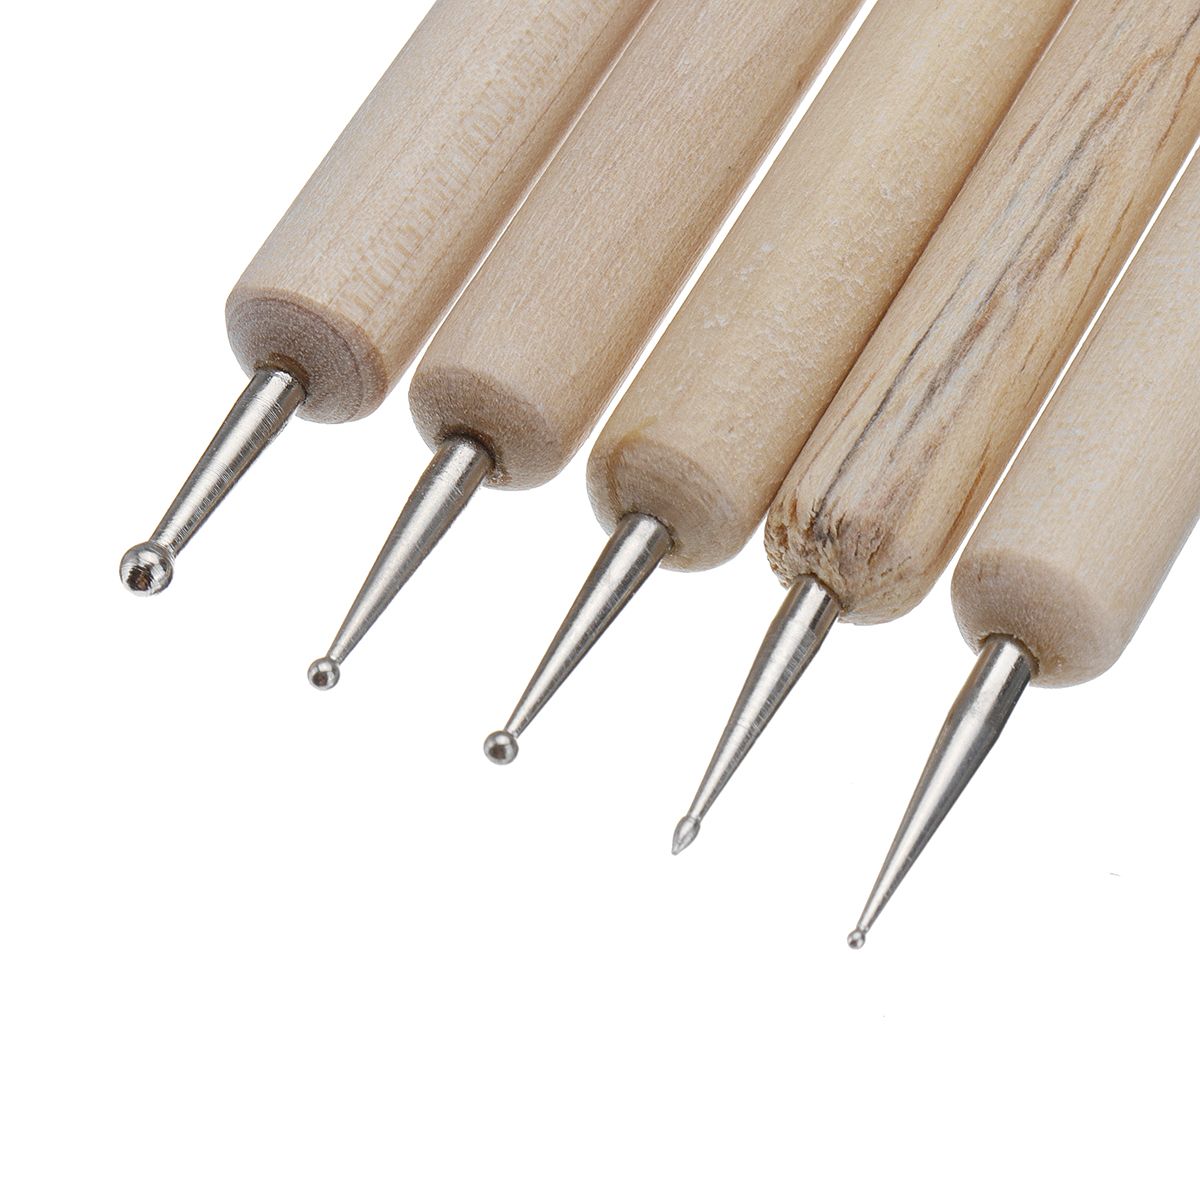 18-pcs-Professional-Polymer-Clay-Sculpting-Tools-Pottery-Models-Art-Projects-Kit-1533747